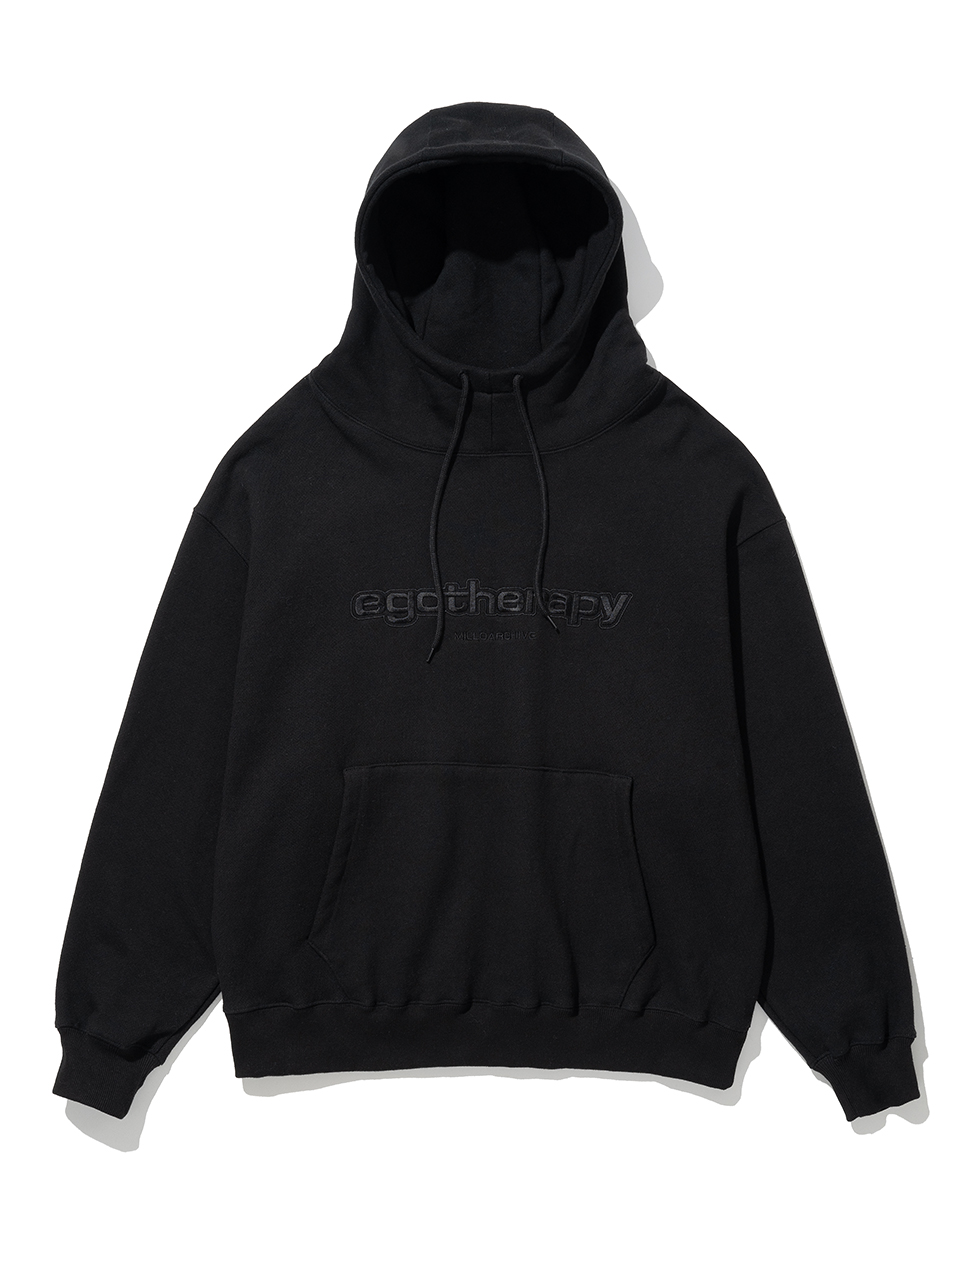 Ego Theraphy Hoodie - Black